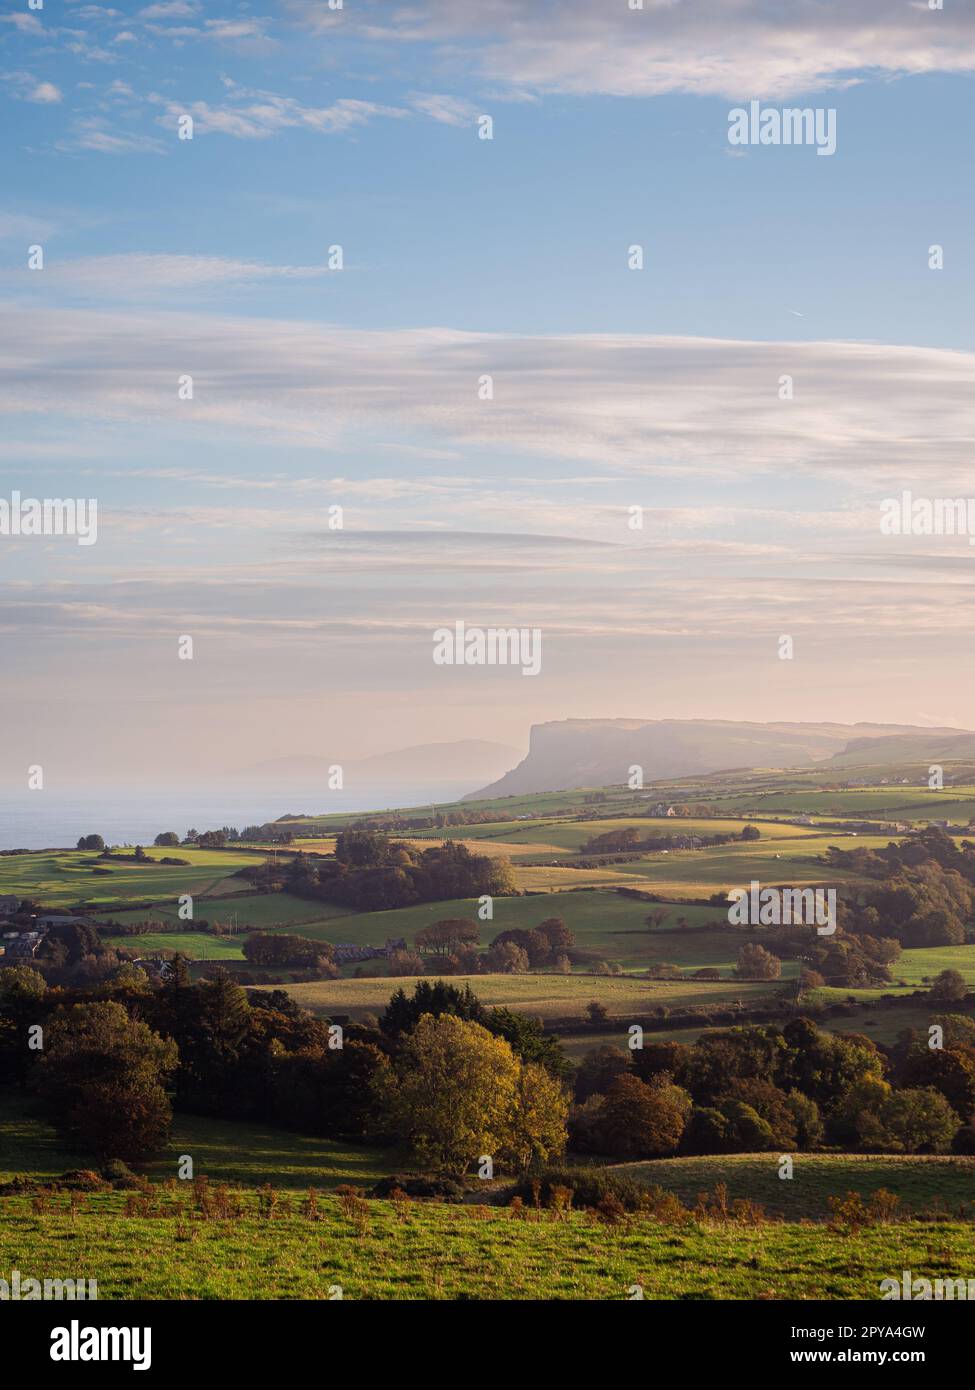 A view of the rural countryside in Northern Ireland in the town of Ballycastle. Fields in the foreground lead to the ocean in the background. Stock Photo